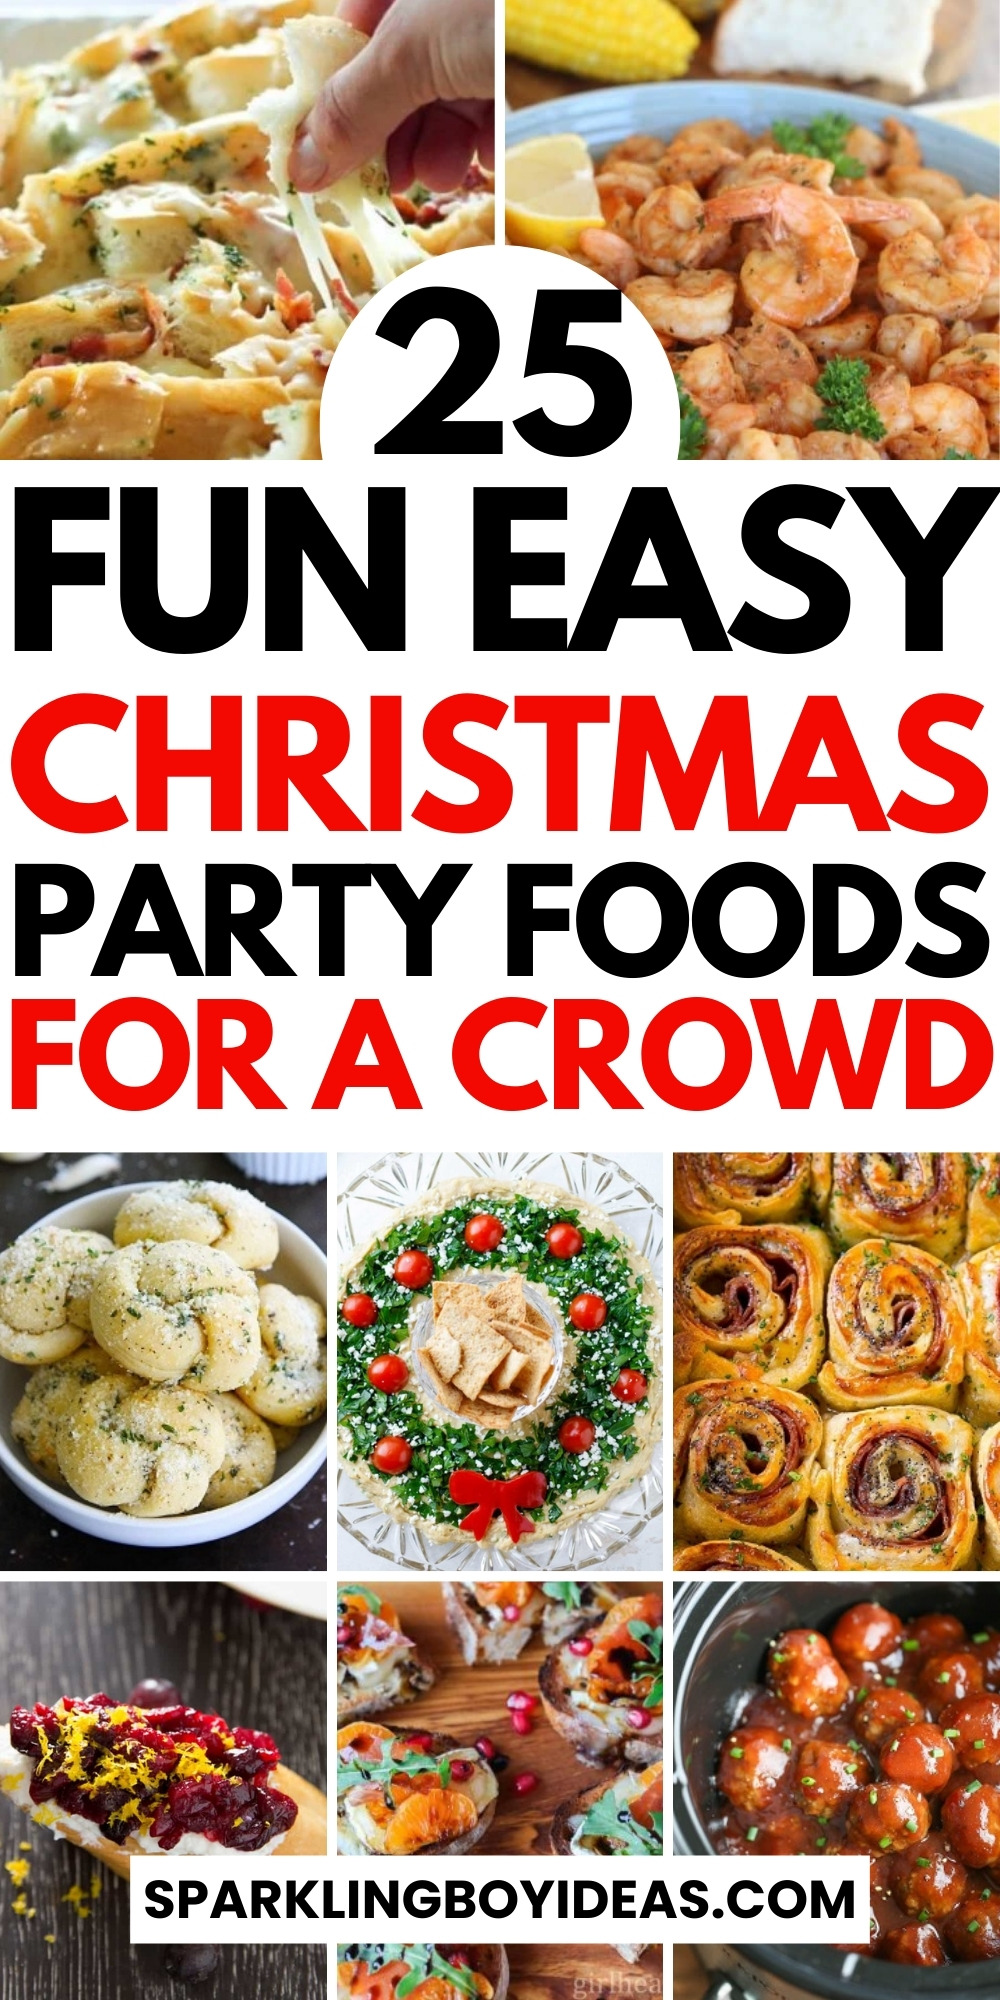 25 Best Christmas Party Food - Sparkling Boy Ideas